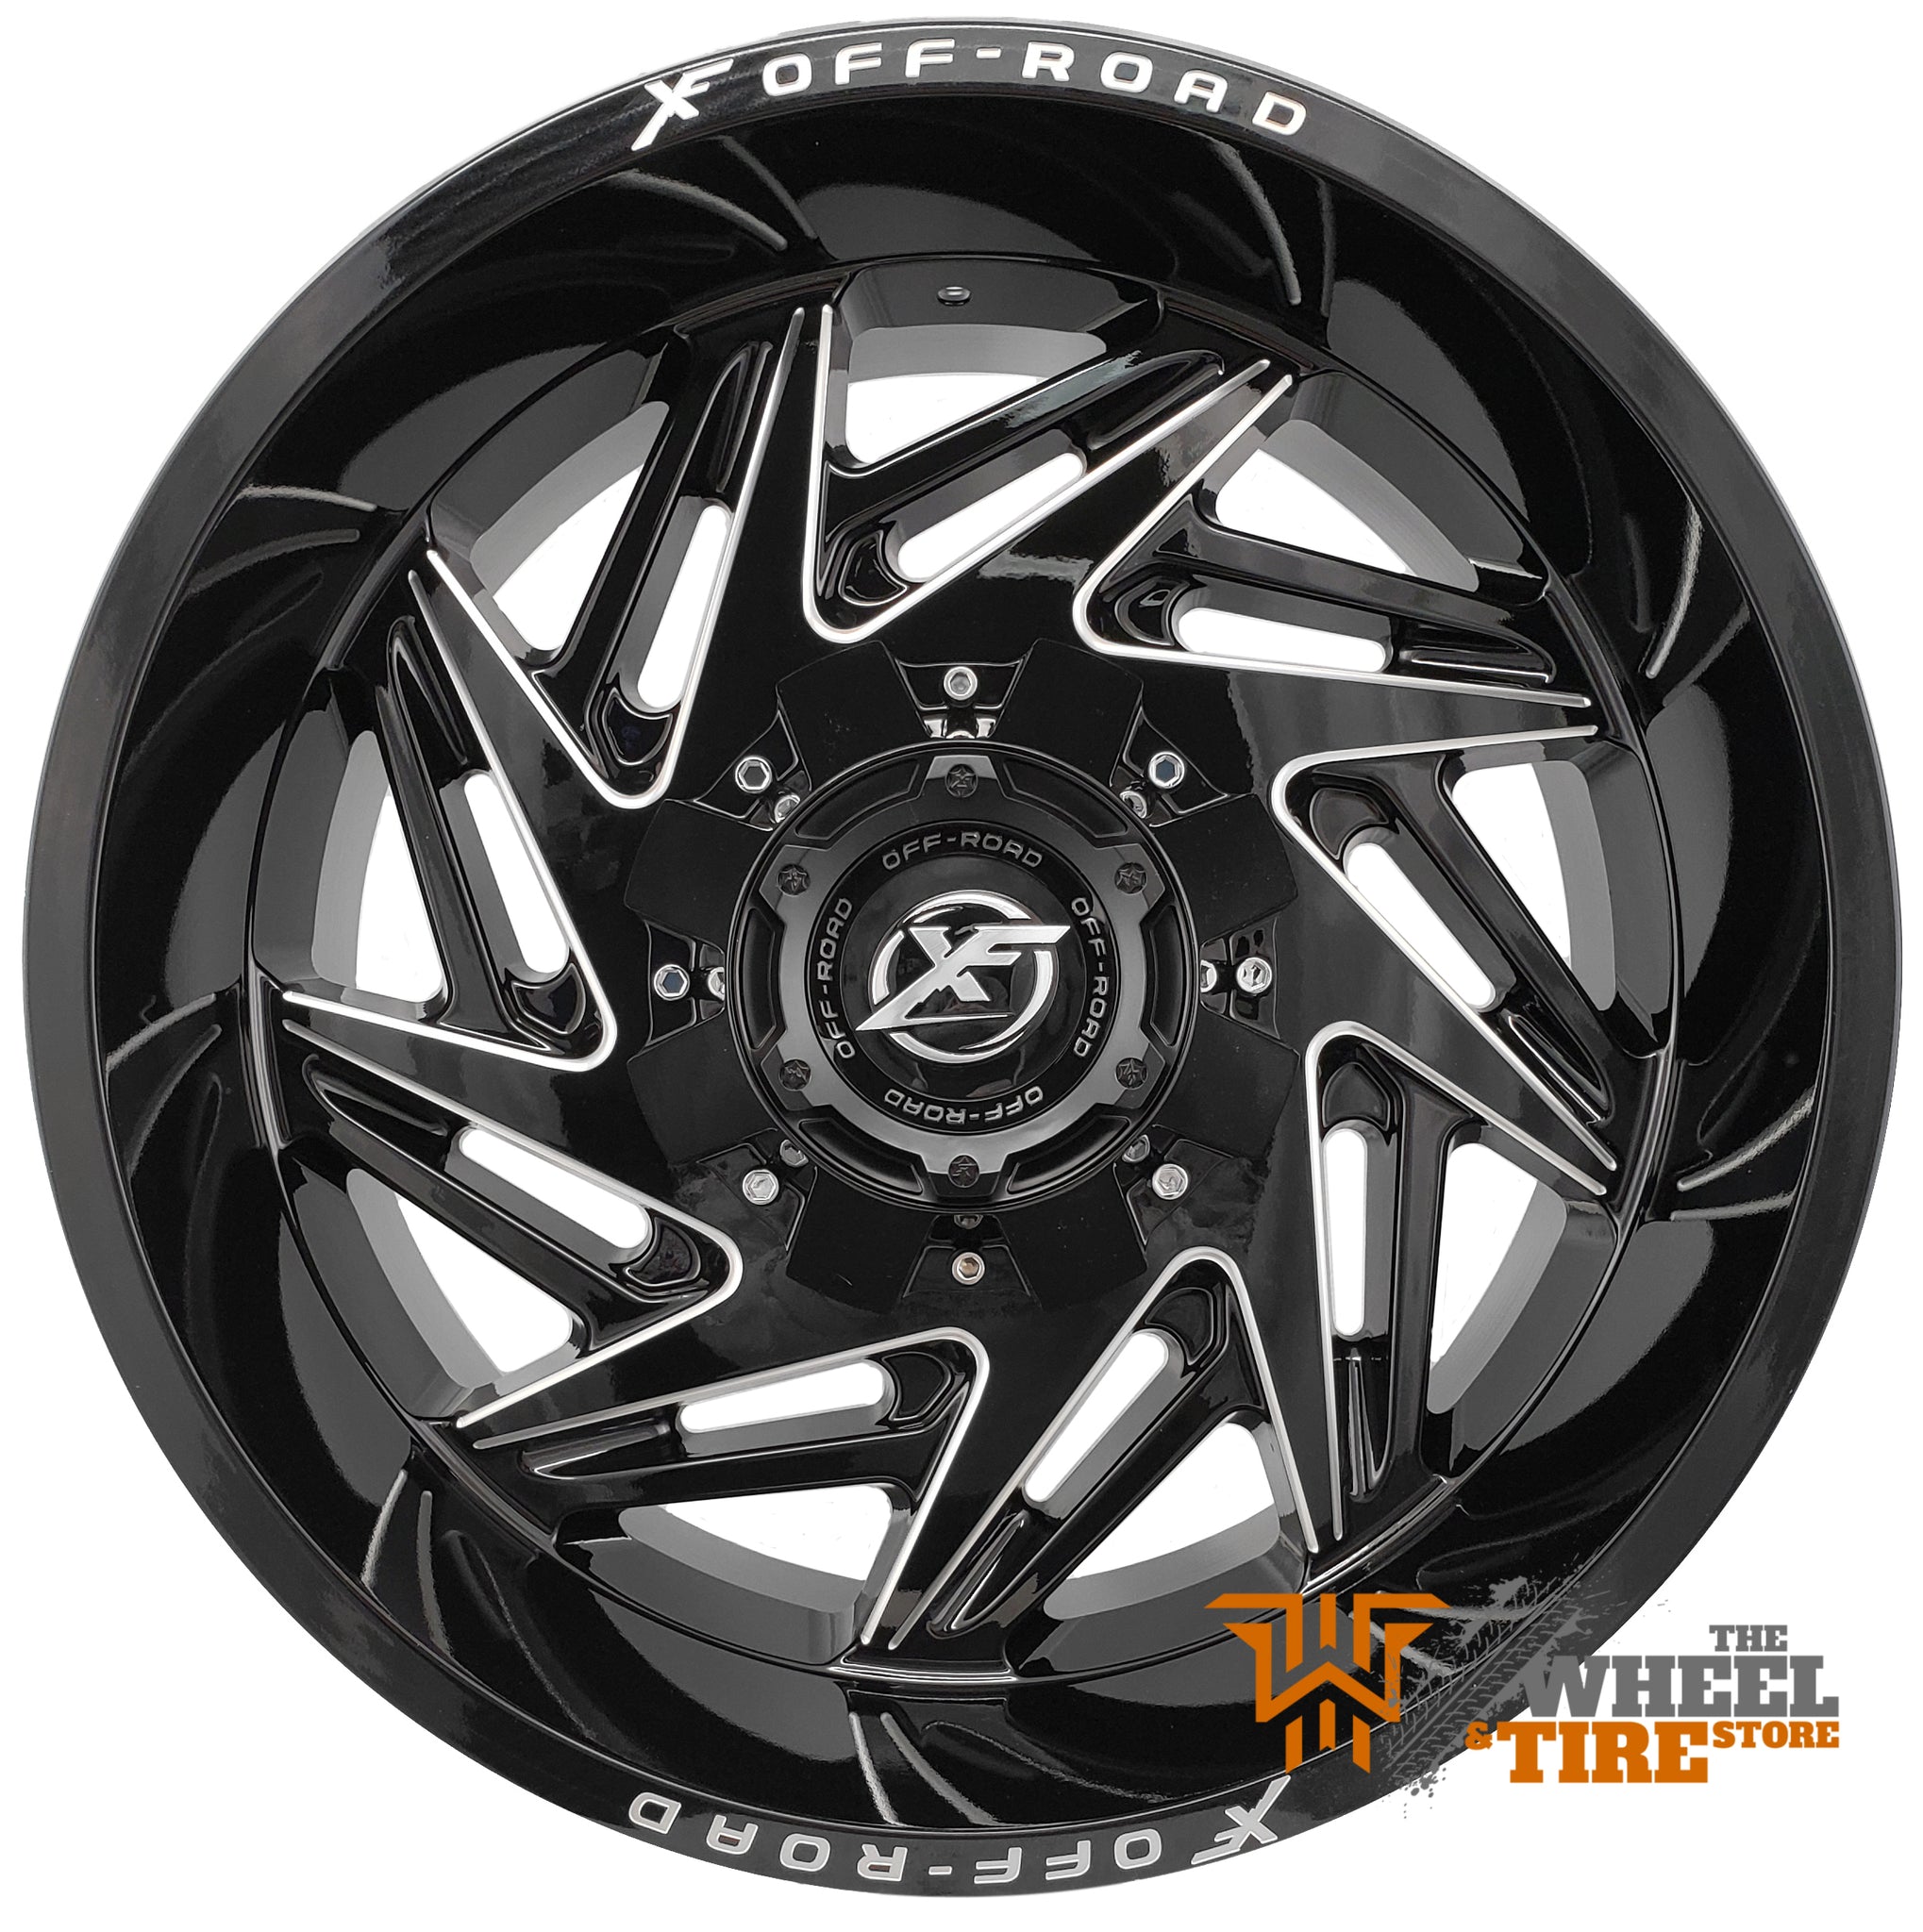 XTREME FORCE XF-203 Wheel in Gloss Black Milled (Set of 4)